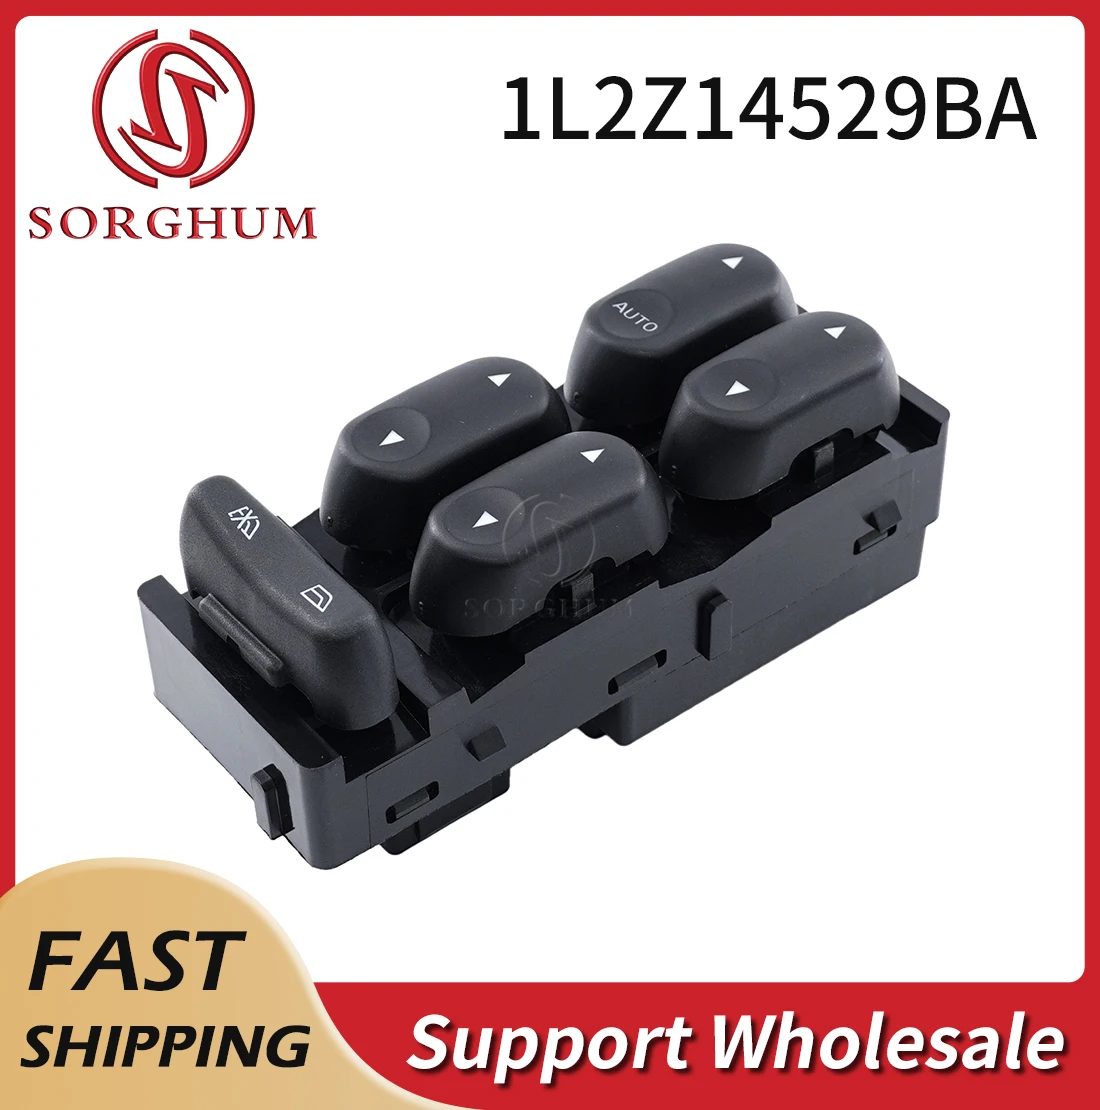 

Sorghum 1L2Z14529BA Car Left Power Window Control Switch For Ford F250 F350 F450 F550 Mercury Explorer Mountaineer 4L2Z14529AAA